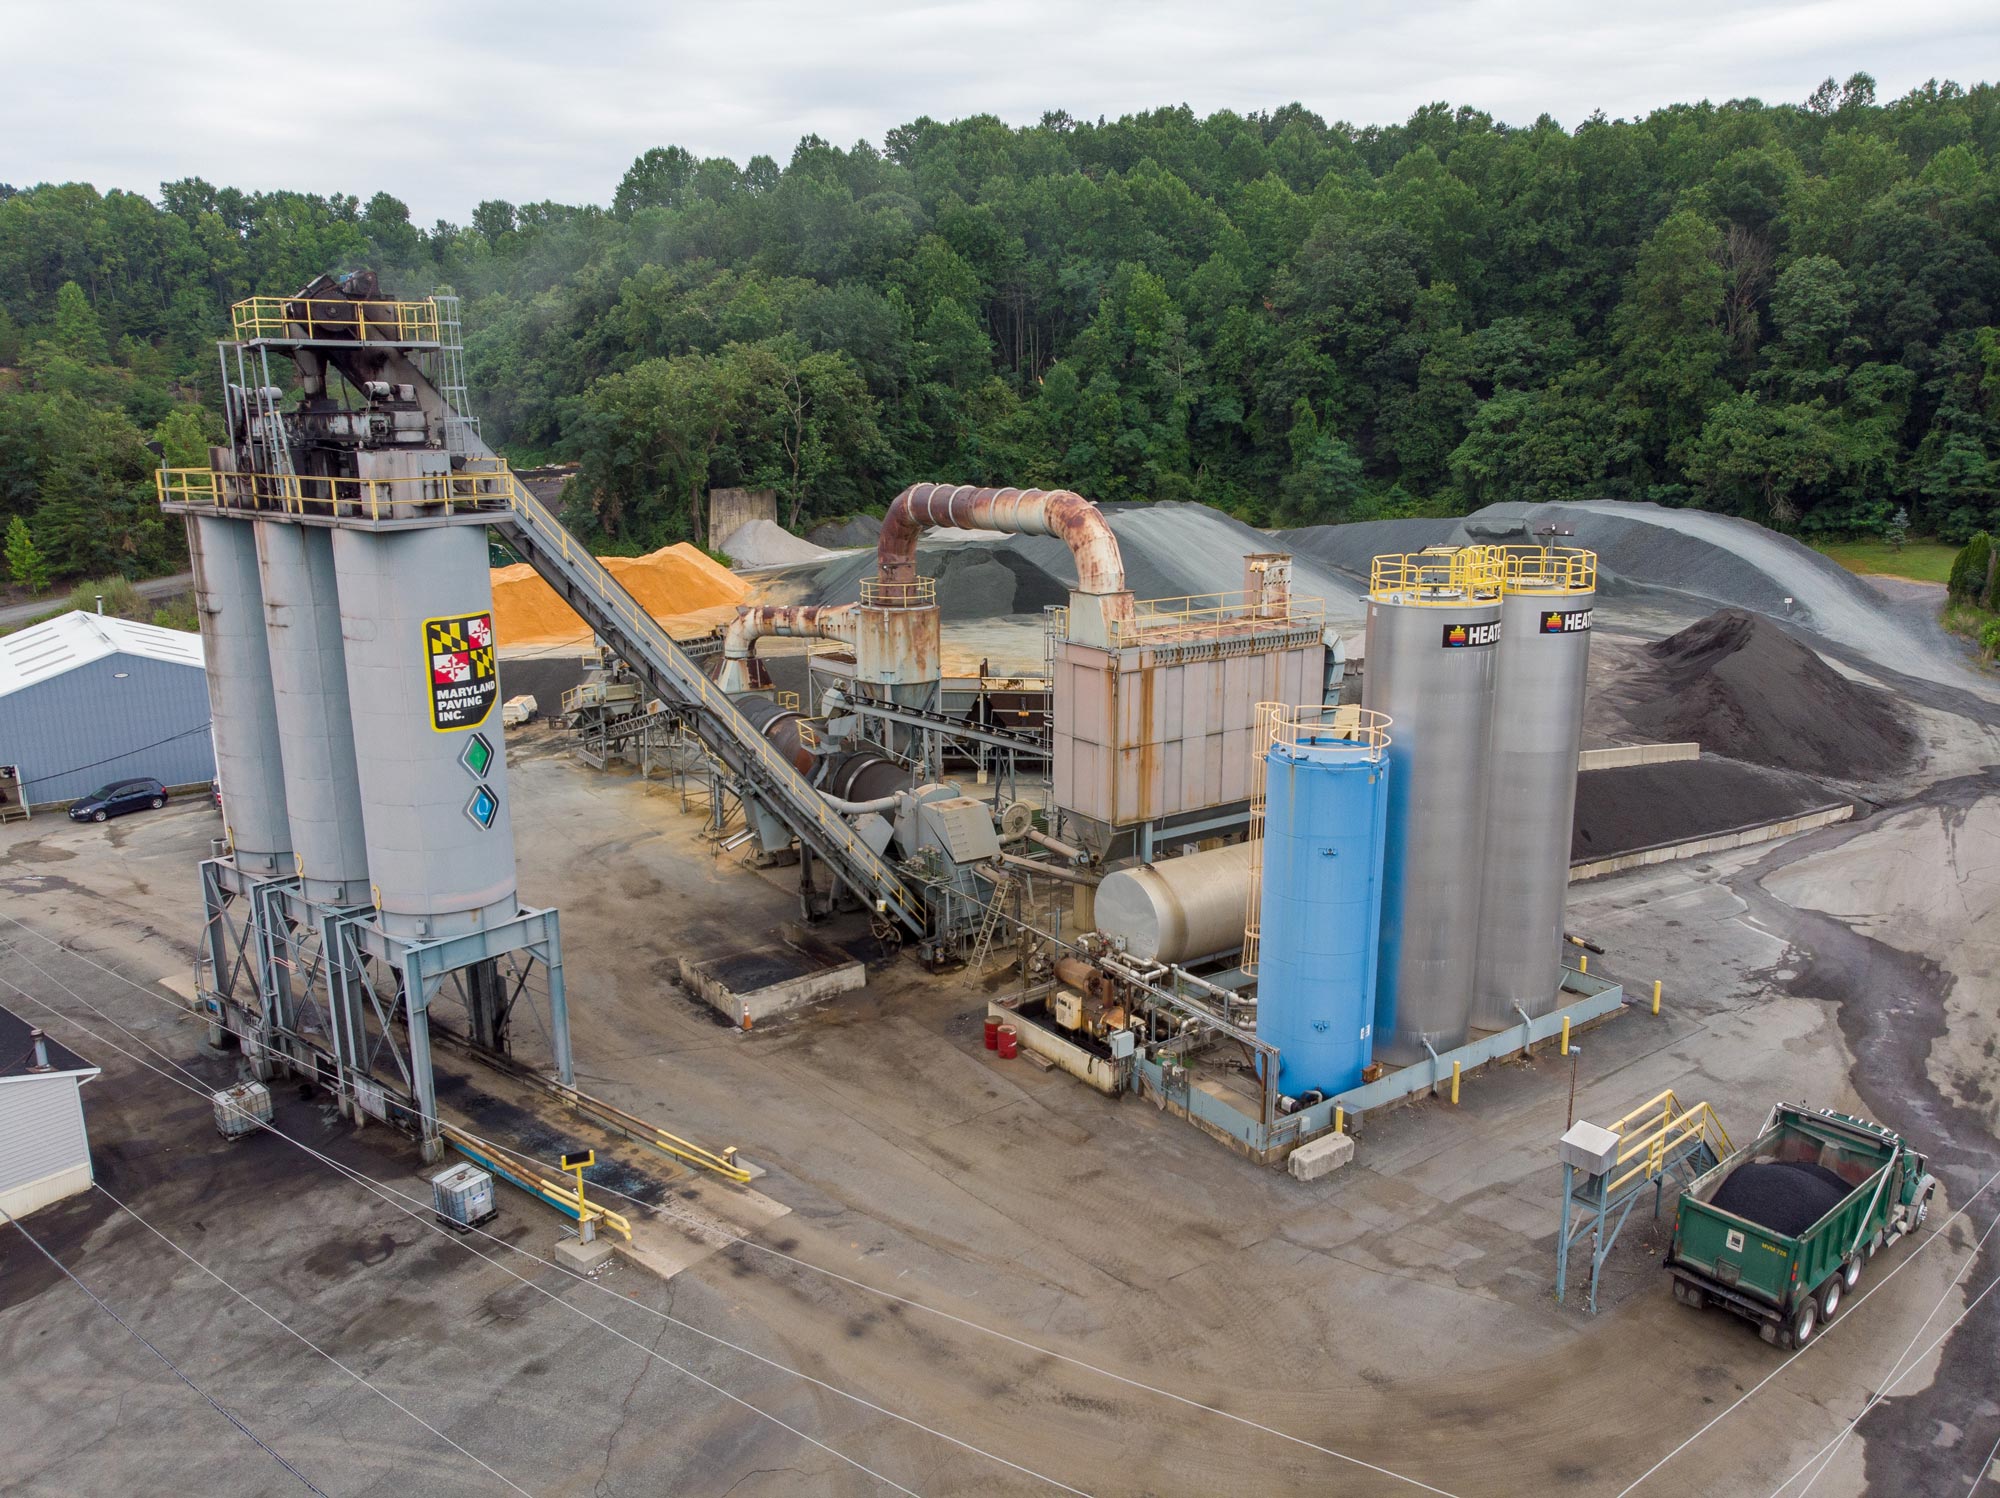 over looking a large asphalt storage silos at a paving plant located in maryland, owned and operated by Gray & Son a leading site and development contractor in Maryland.